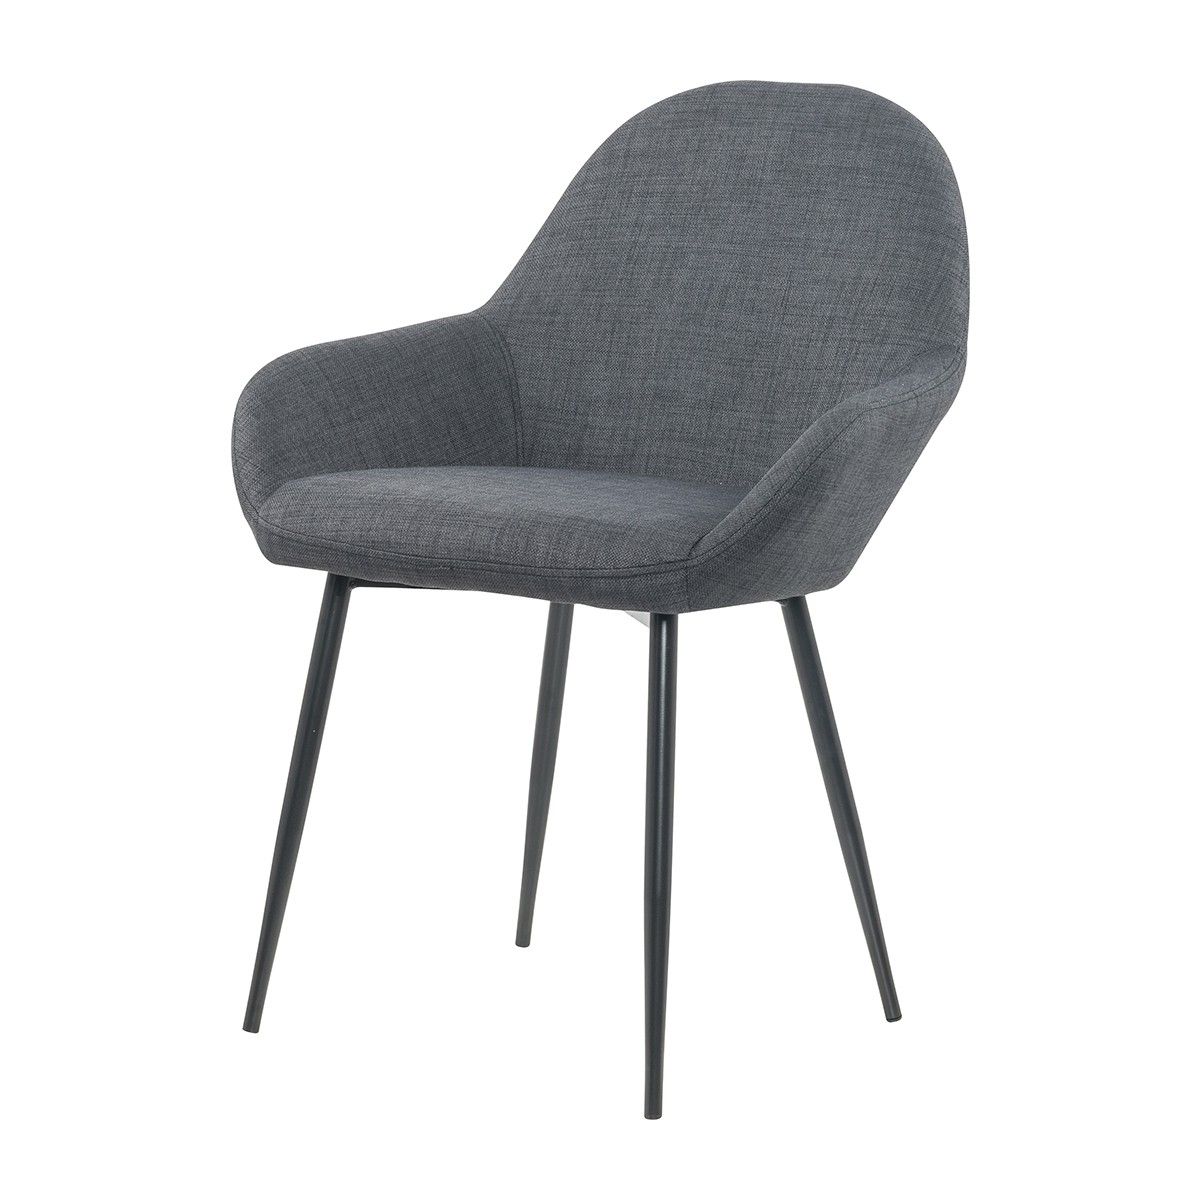 Popular Life Interiors – Brooke Fabric Dining Chair (charcoal) – Modern Pertaining To Charcoal Dining Chairs (View 5 of 20)